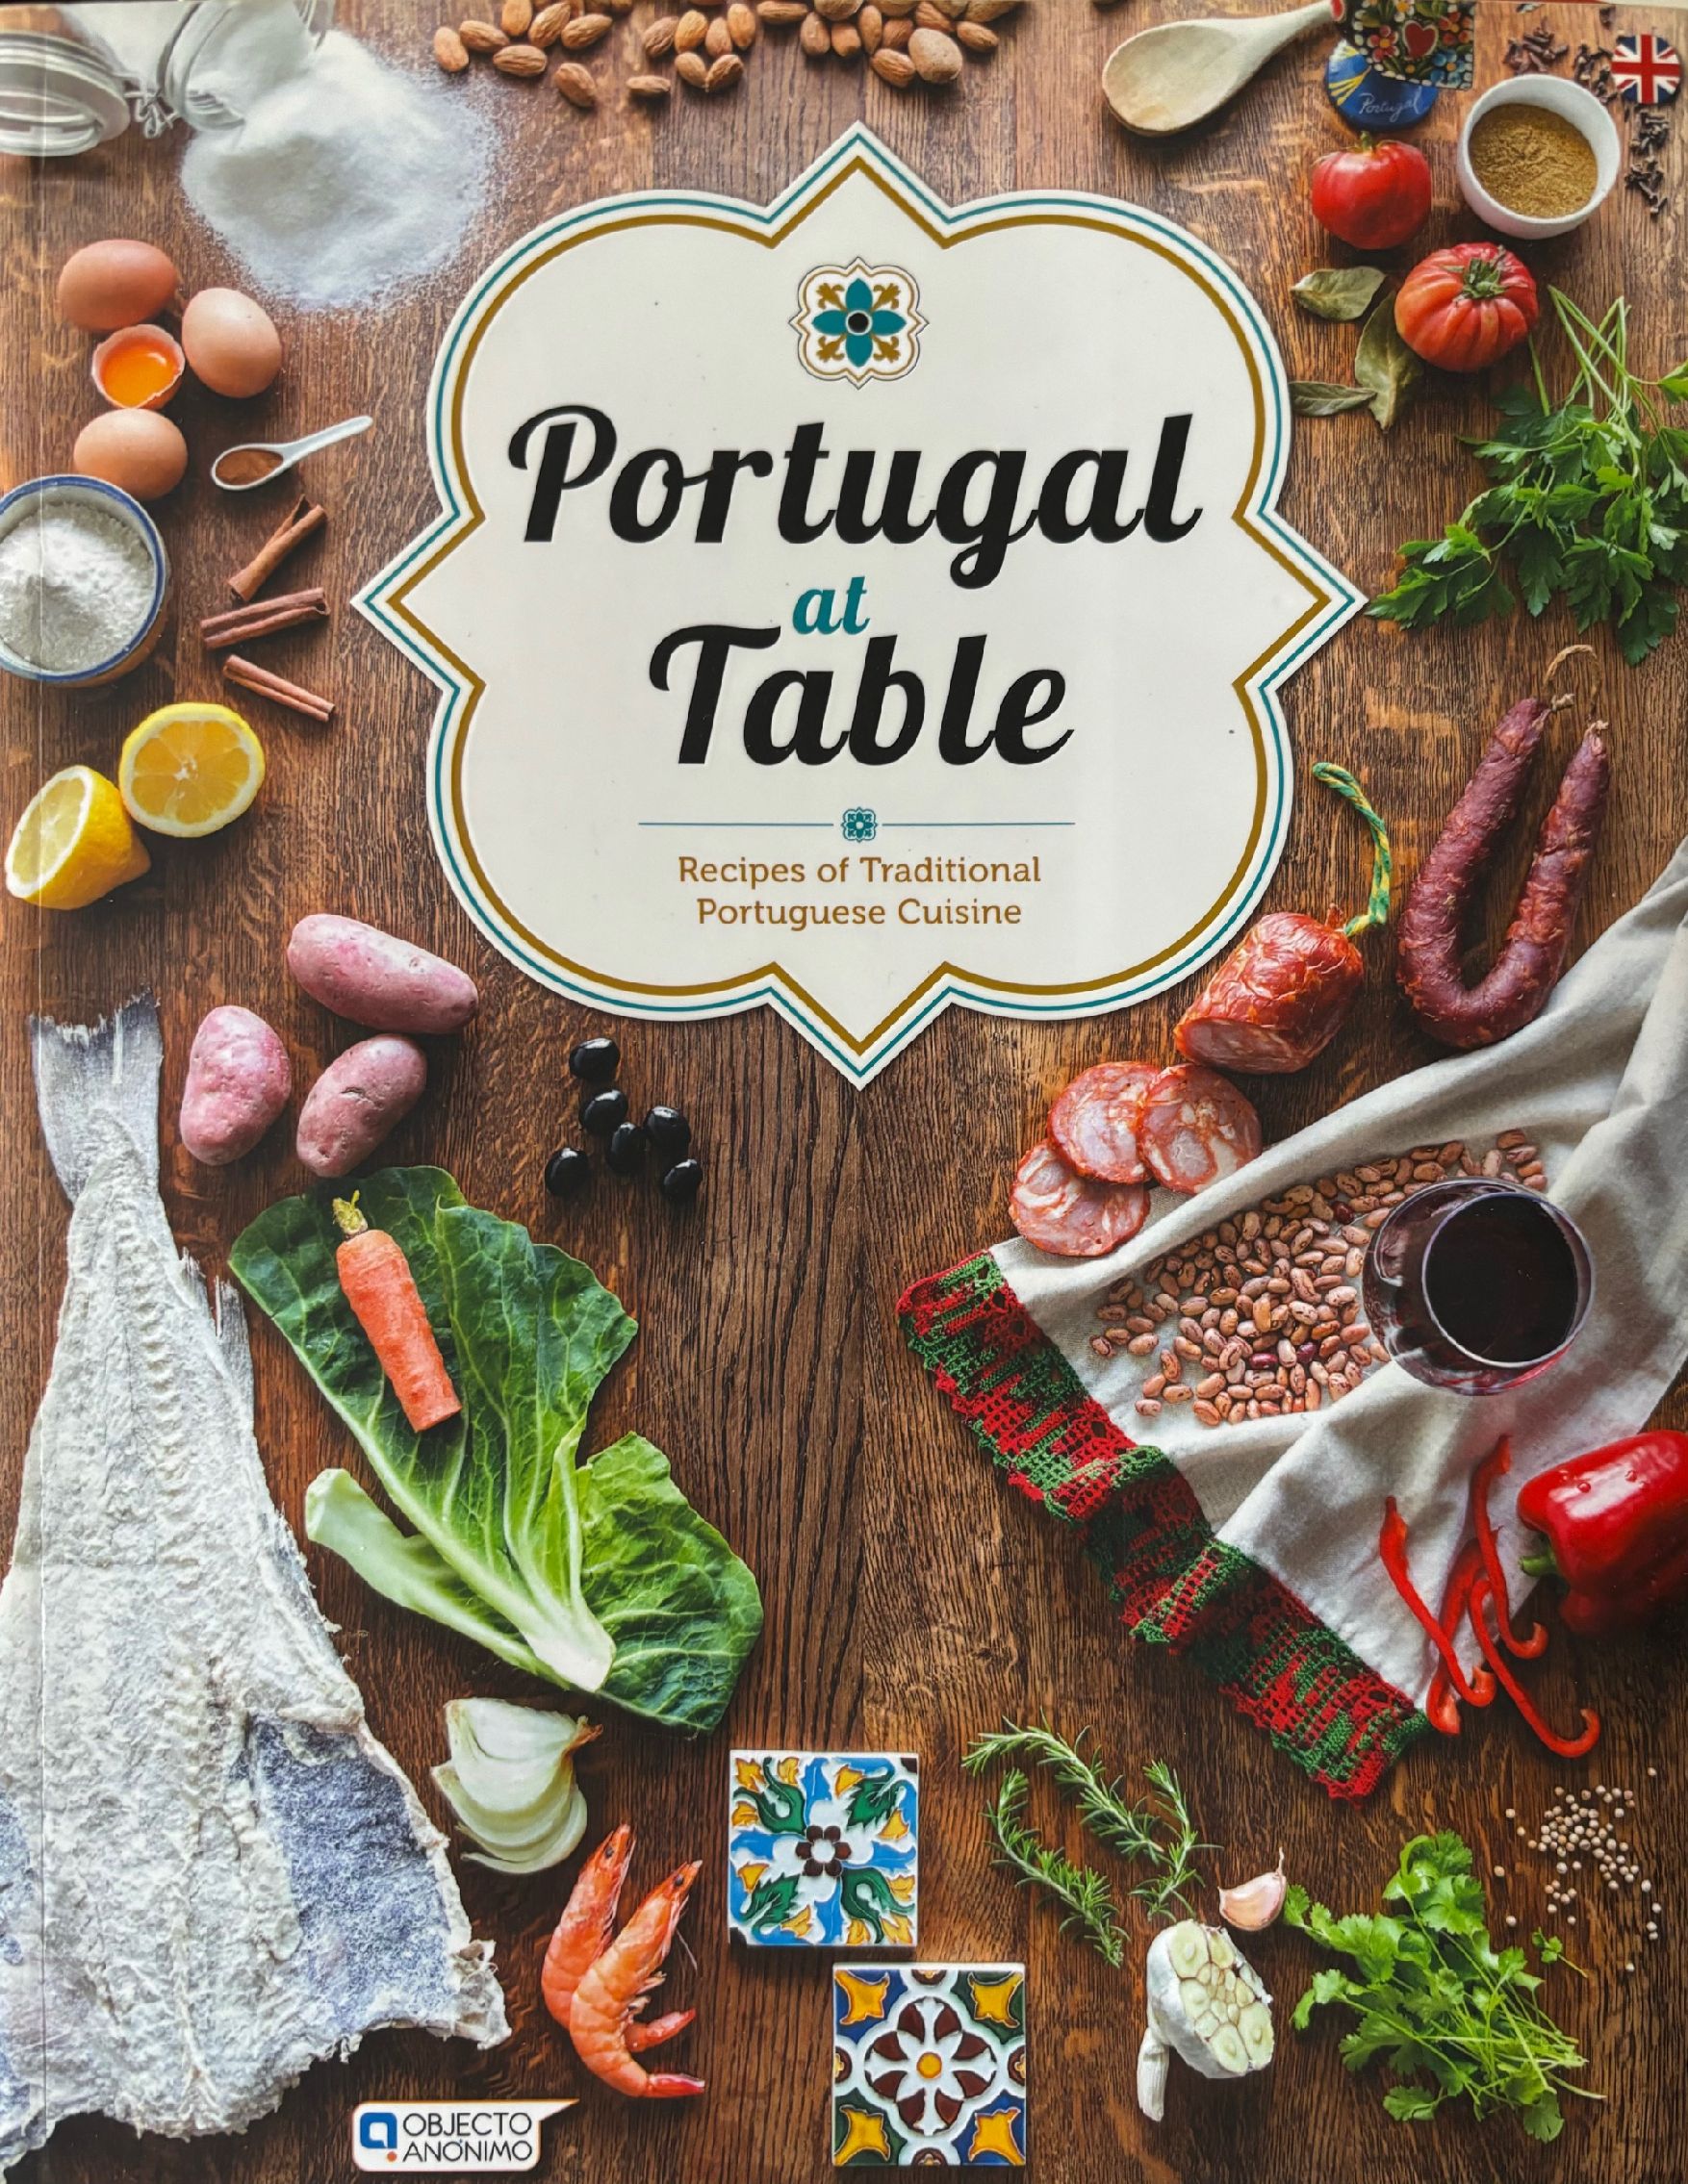 Portugal at Table: Recipes of Traditional Portuguese Cuisine